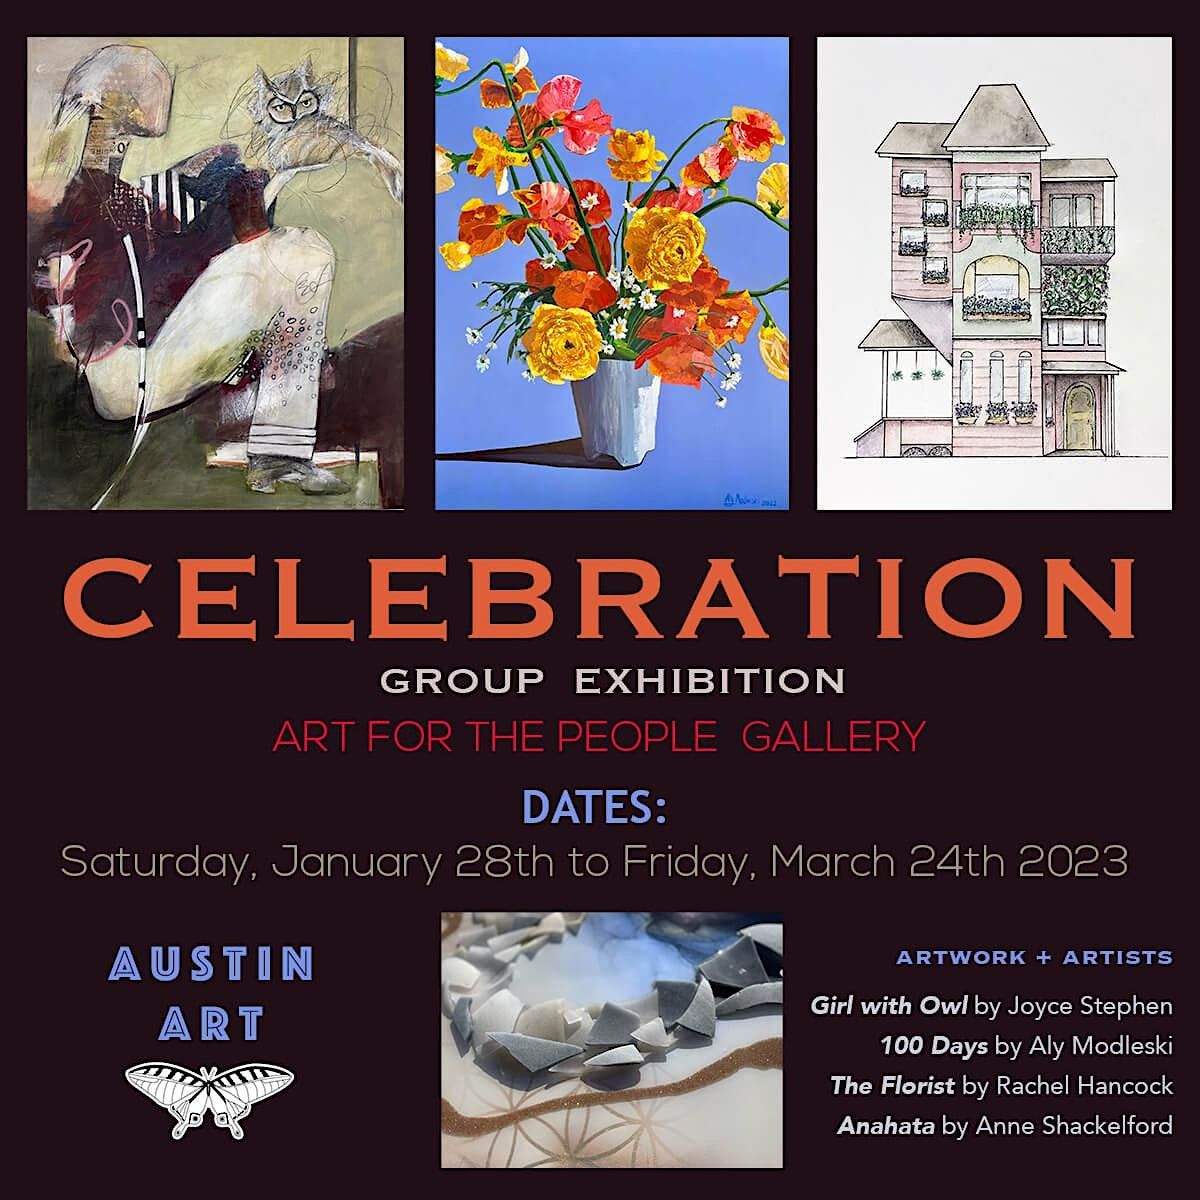 "CELEBRATION", group exhibition at Art for the People Gallery